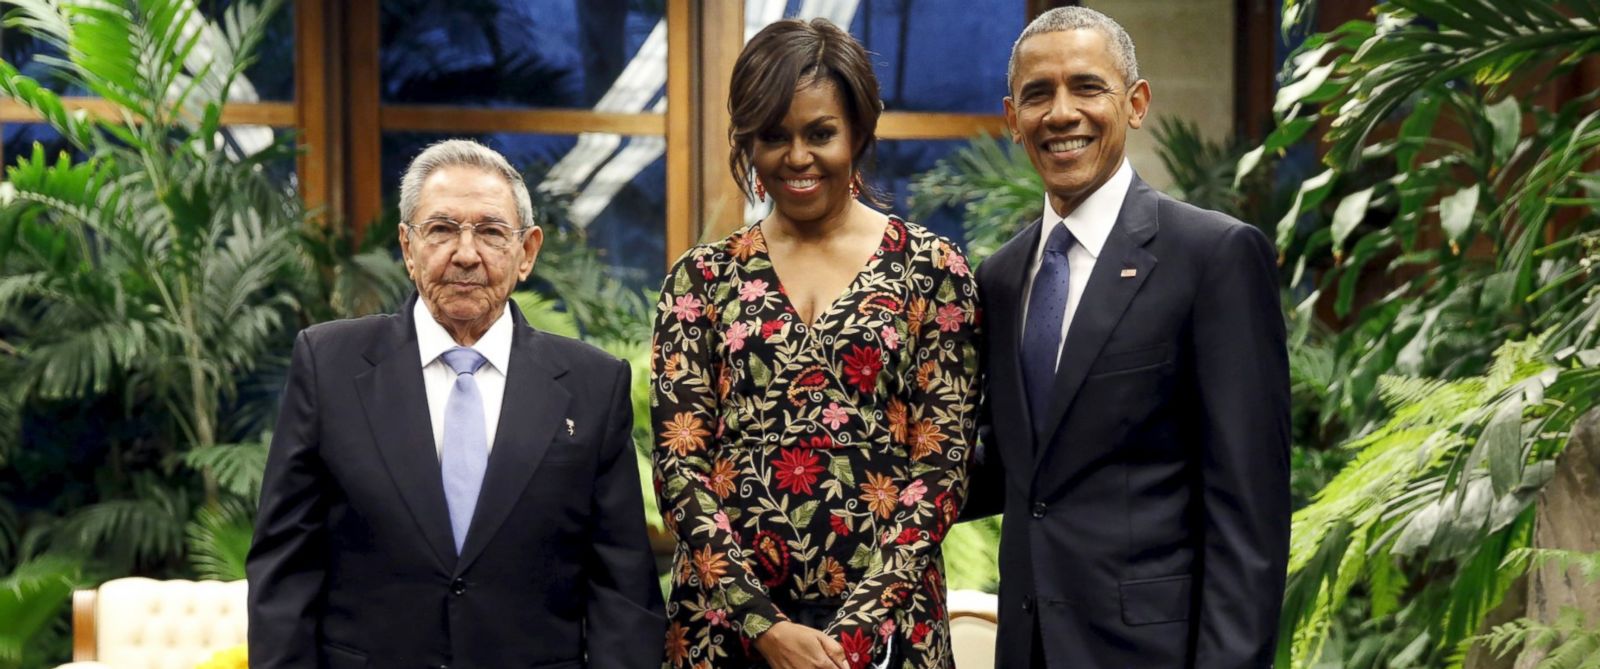 President Obama and First Family Attend State Dinner in Cuba - ABC News